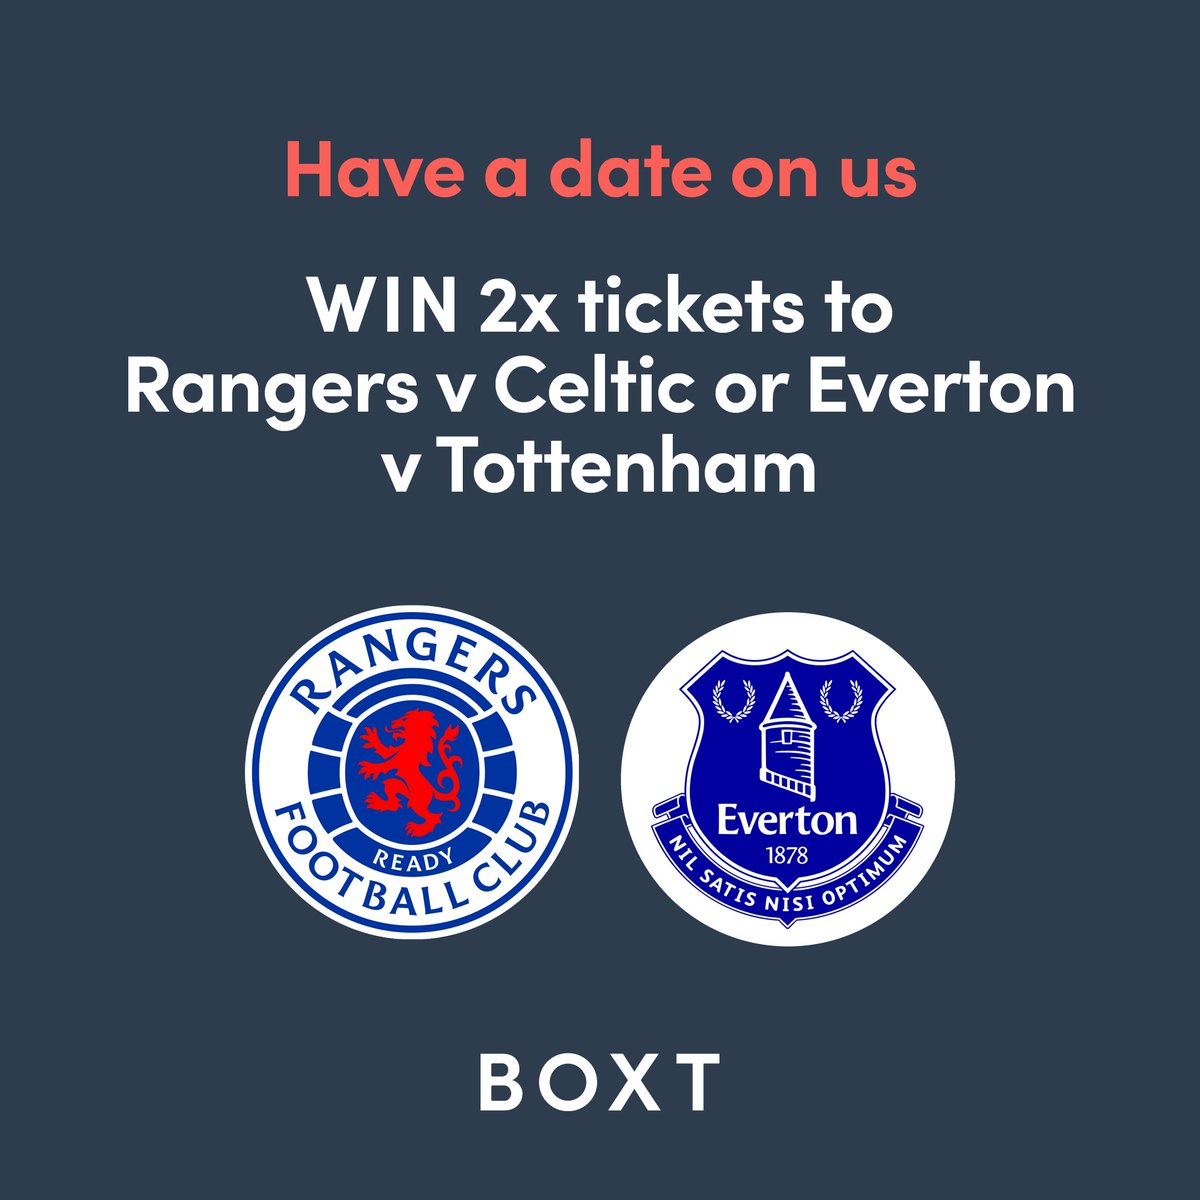 🚨ATTENTION🚨 @Everton and @RangersFC fans - have a date on us! WIN 2 x tickets to either Everton v Tottenham or Rangers v Celtic 🎟️ To enter: 💙 Follow us 💙 Tag the person you will take 💙 Retweet Comp ends & winner announced 17/02 at 11am T&C’s apply